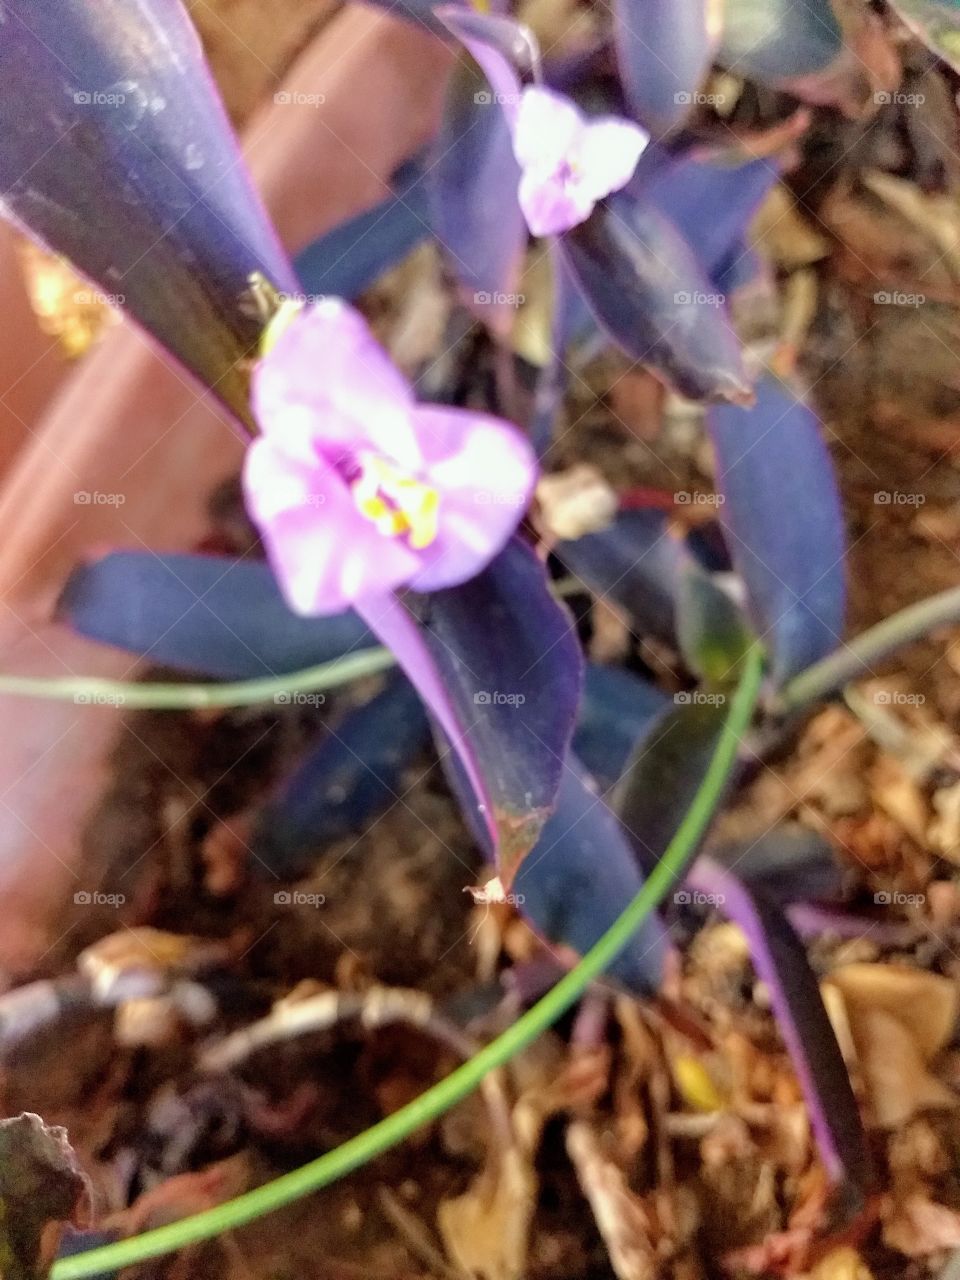 Wandering Jew taking root and thriving, and adding another tiny, pink flower